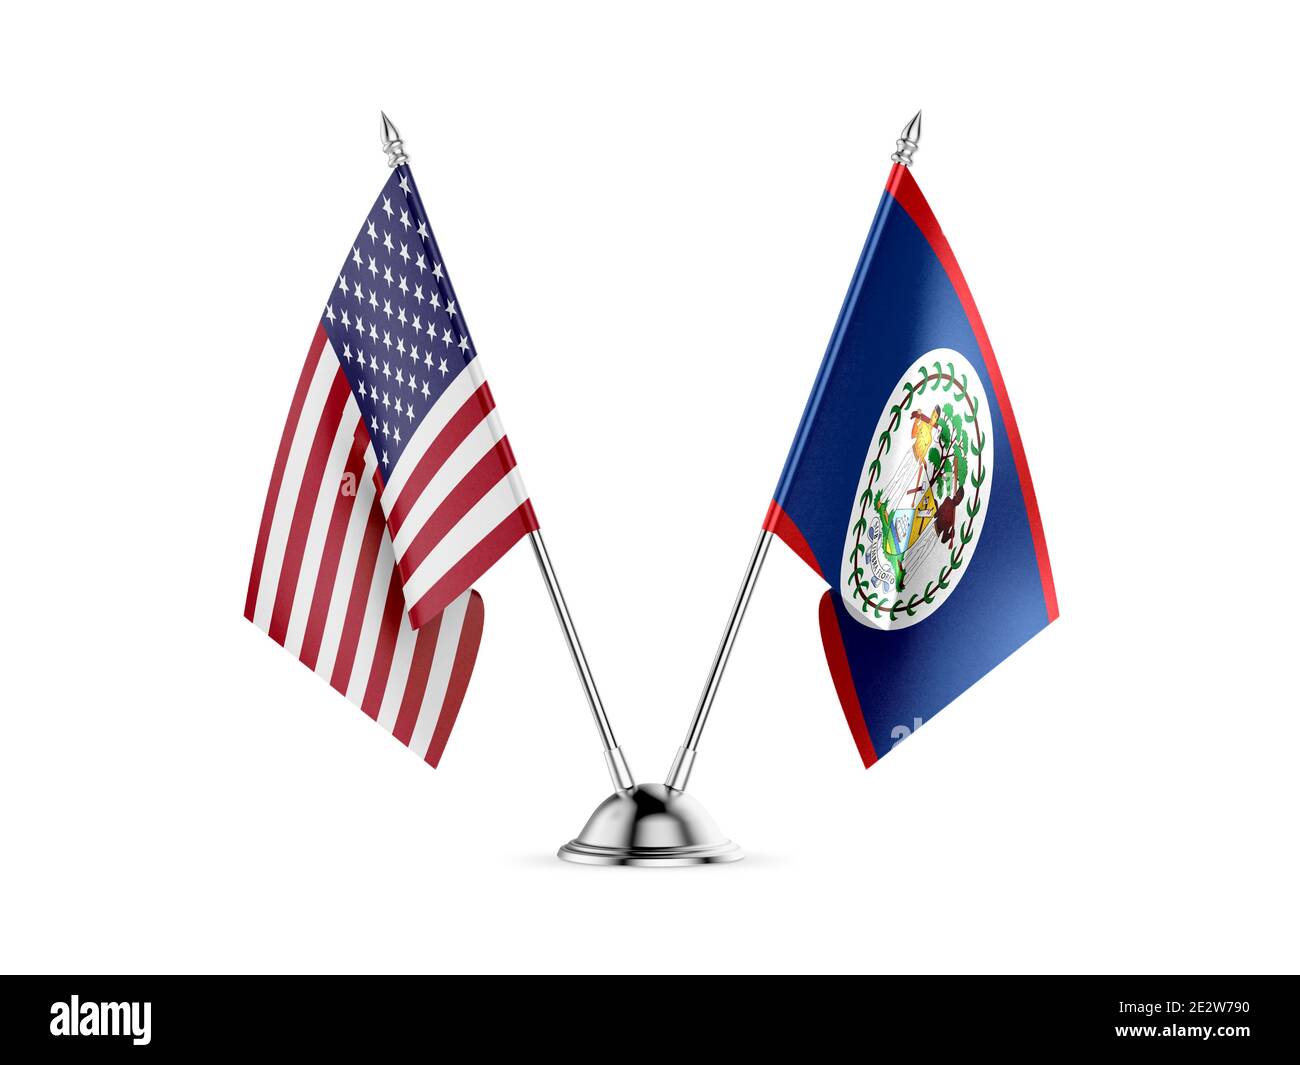 Desk flags, United States  America  and Belize, isolated on white background. 3d image Stock Photo